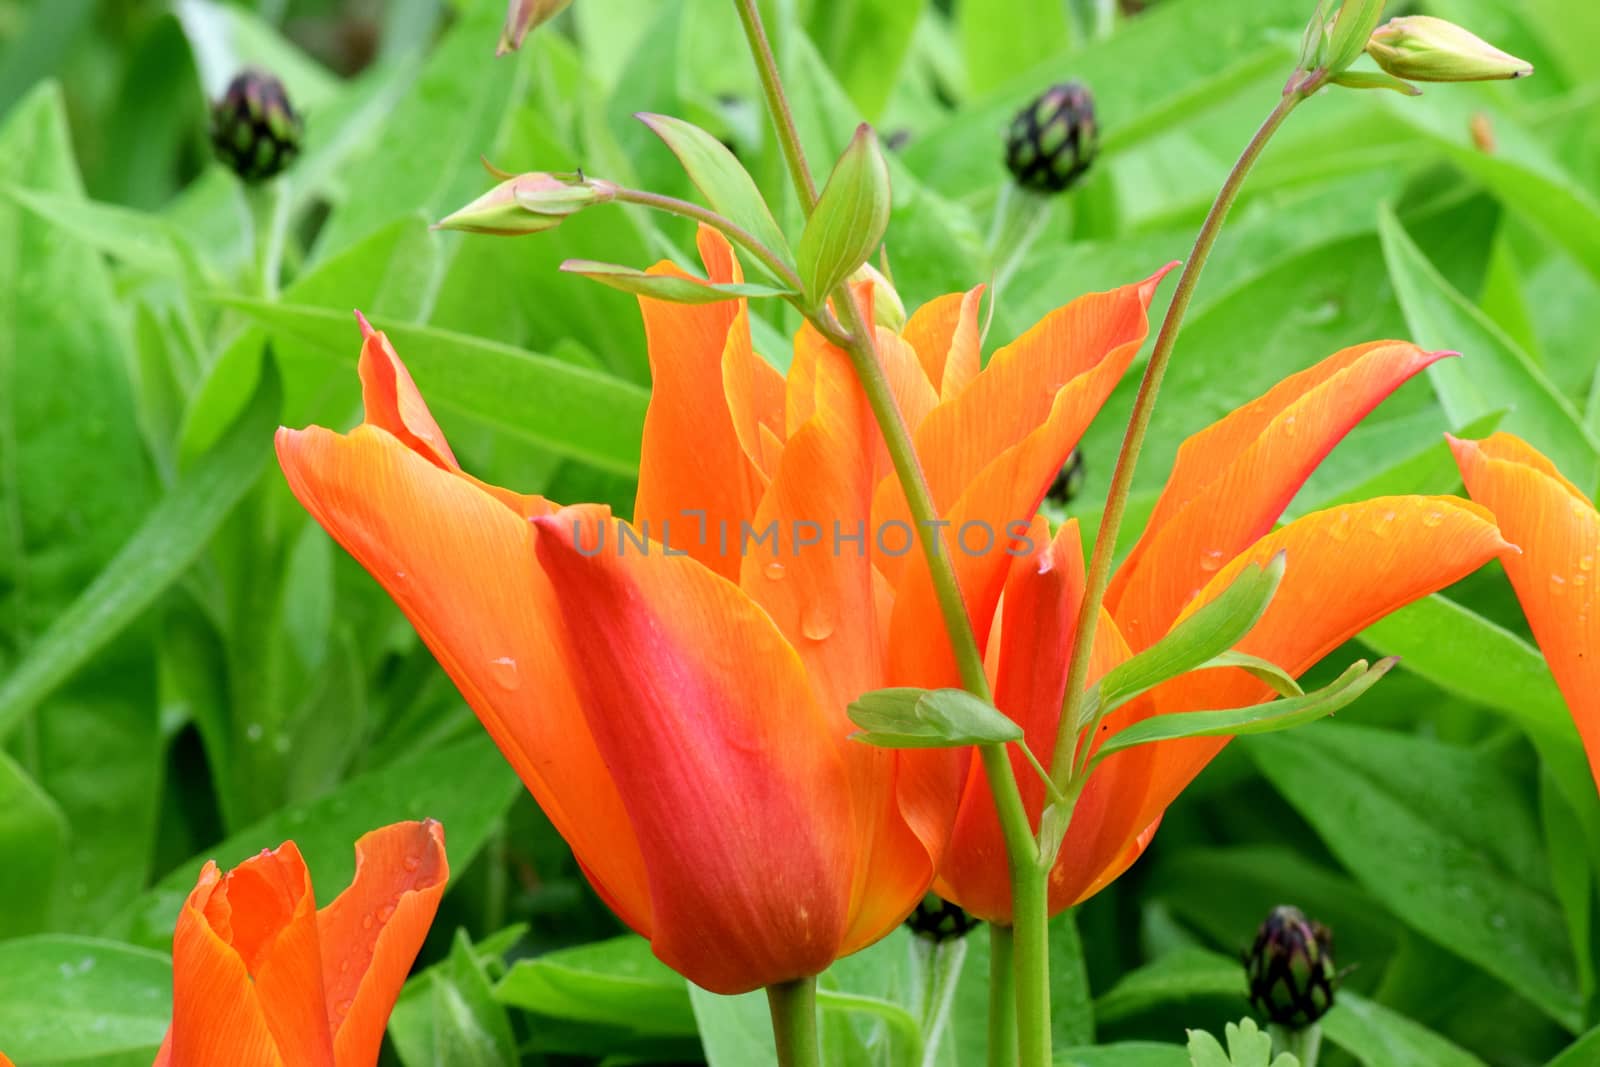 .Photograph taken in an English Country Cottage garden of orange tulips and aqualegia.


